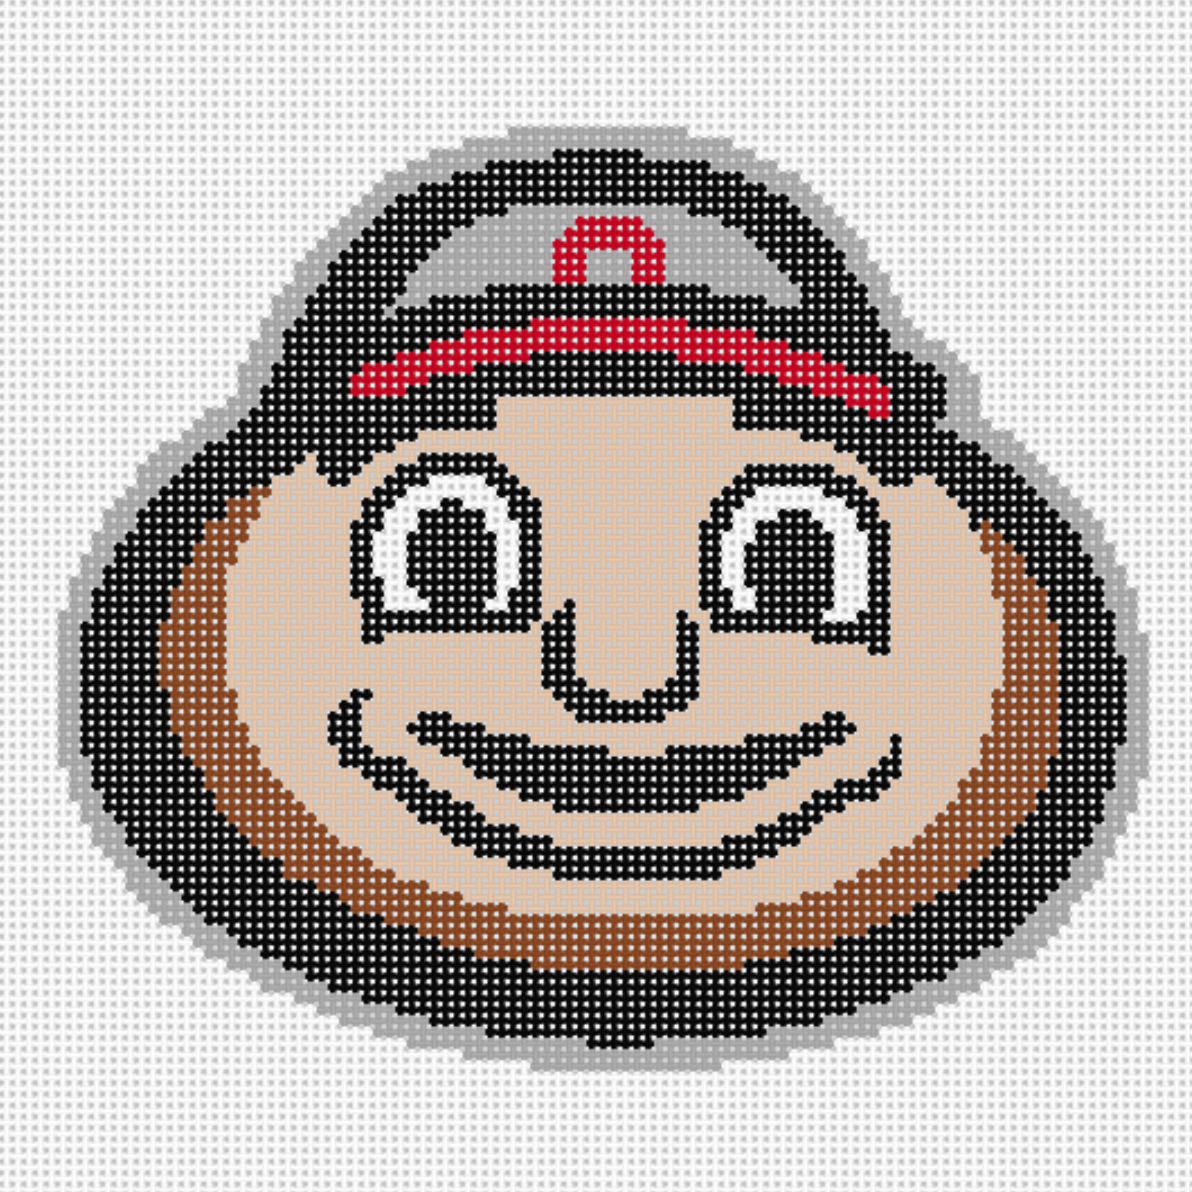 Ohio State Logo 6 by 6 - Needlepoint by Laura